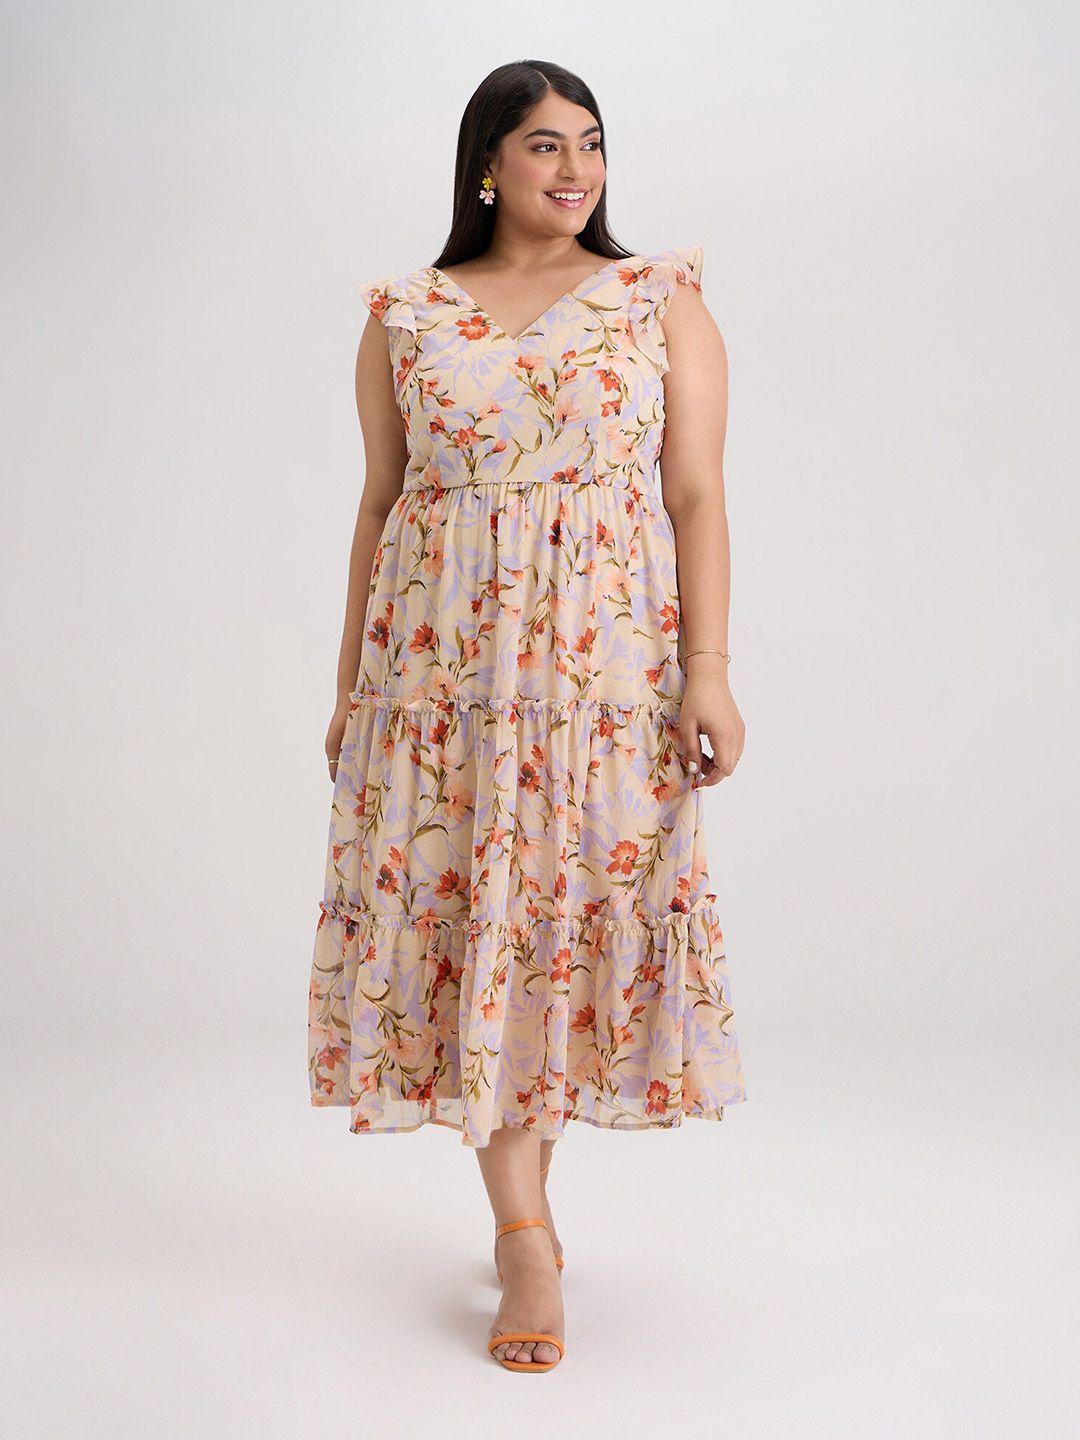 20dresses plus size yellow floral printed v-neck tiered fit & flare midi dress